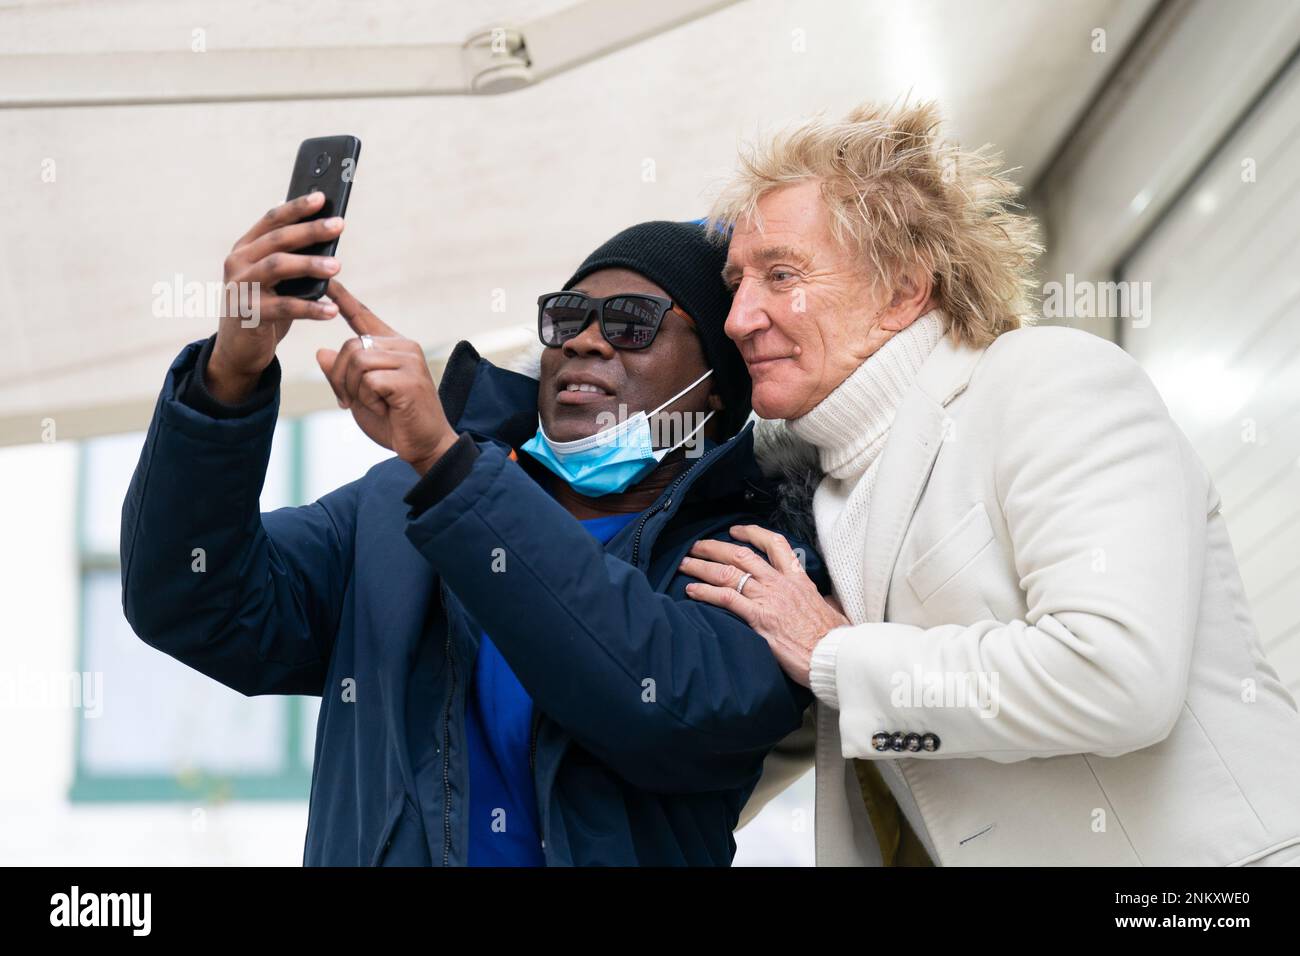 Sir Rod Stewart takes a selfie with Omarie Ryan, who received an MRI scan on his left knee). The musician is meeting patients and medics at the Princess Alexandra Hospital in Harlow, Essex, after he called a phone-in segment on live Sky News in January, and offered to pay for people to have hospital scans, amid the rising number of people on NHS waiting lists. Picture date: Friday February 24, 2023. Stock Photo